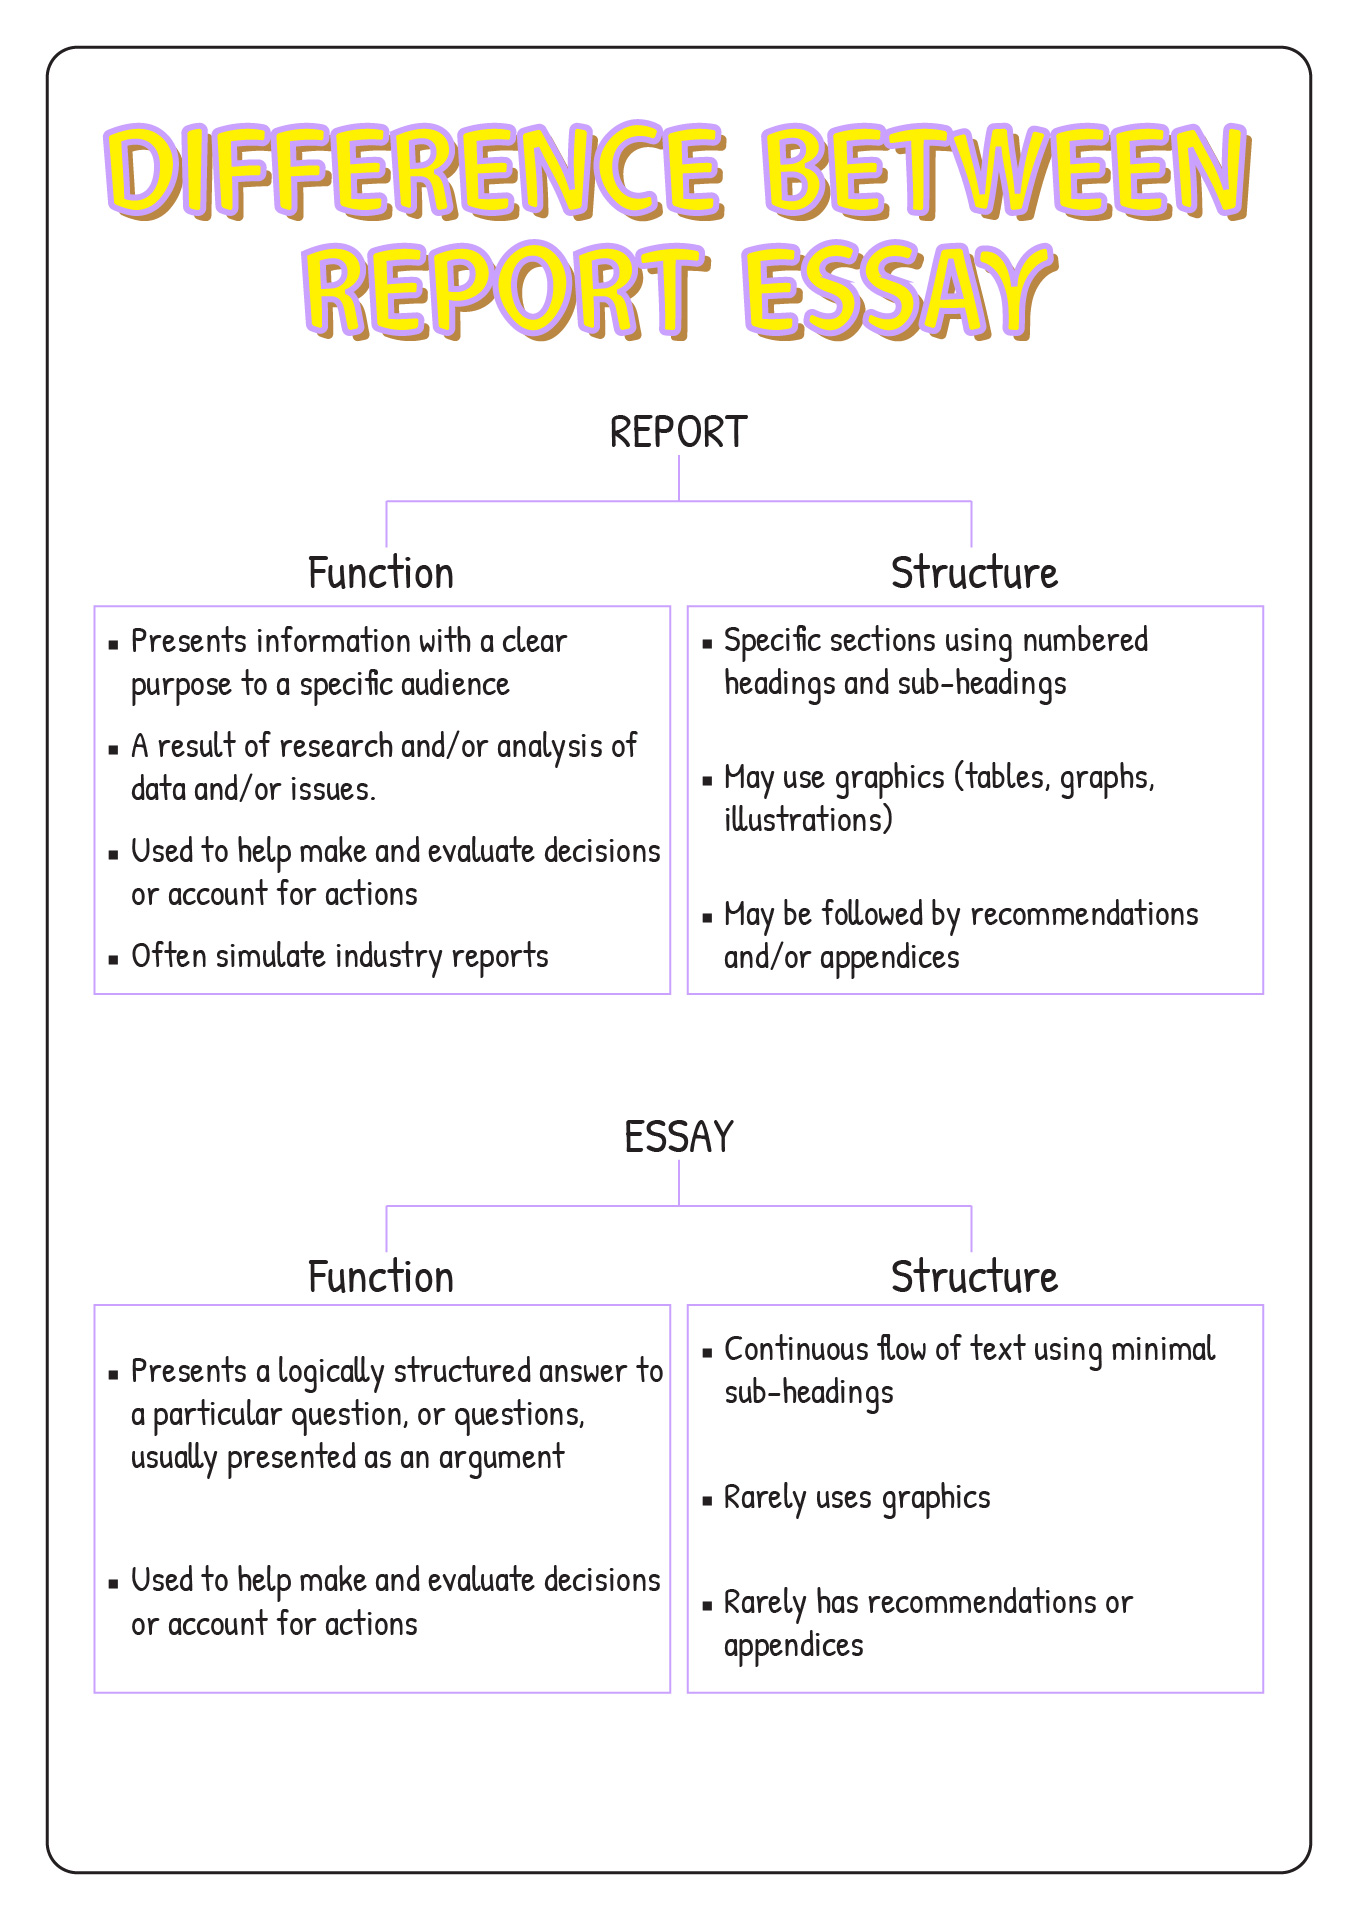 Difference Between Report Essay